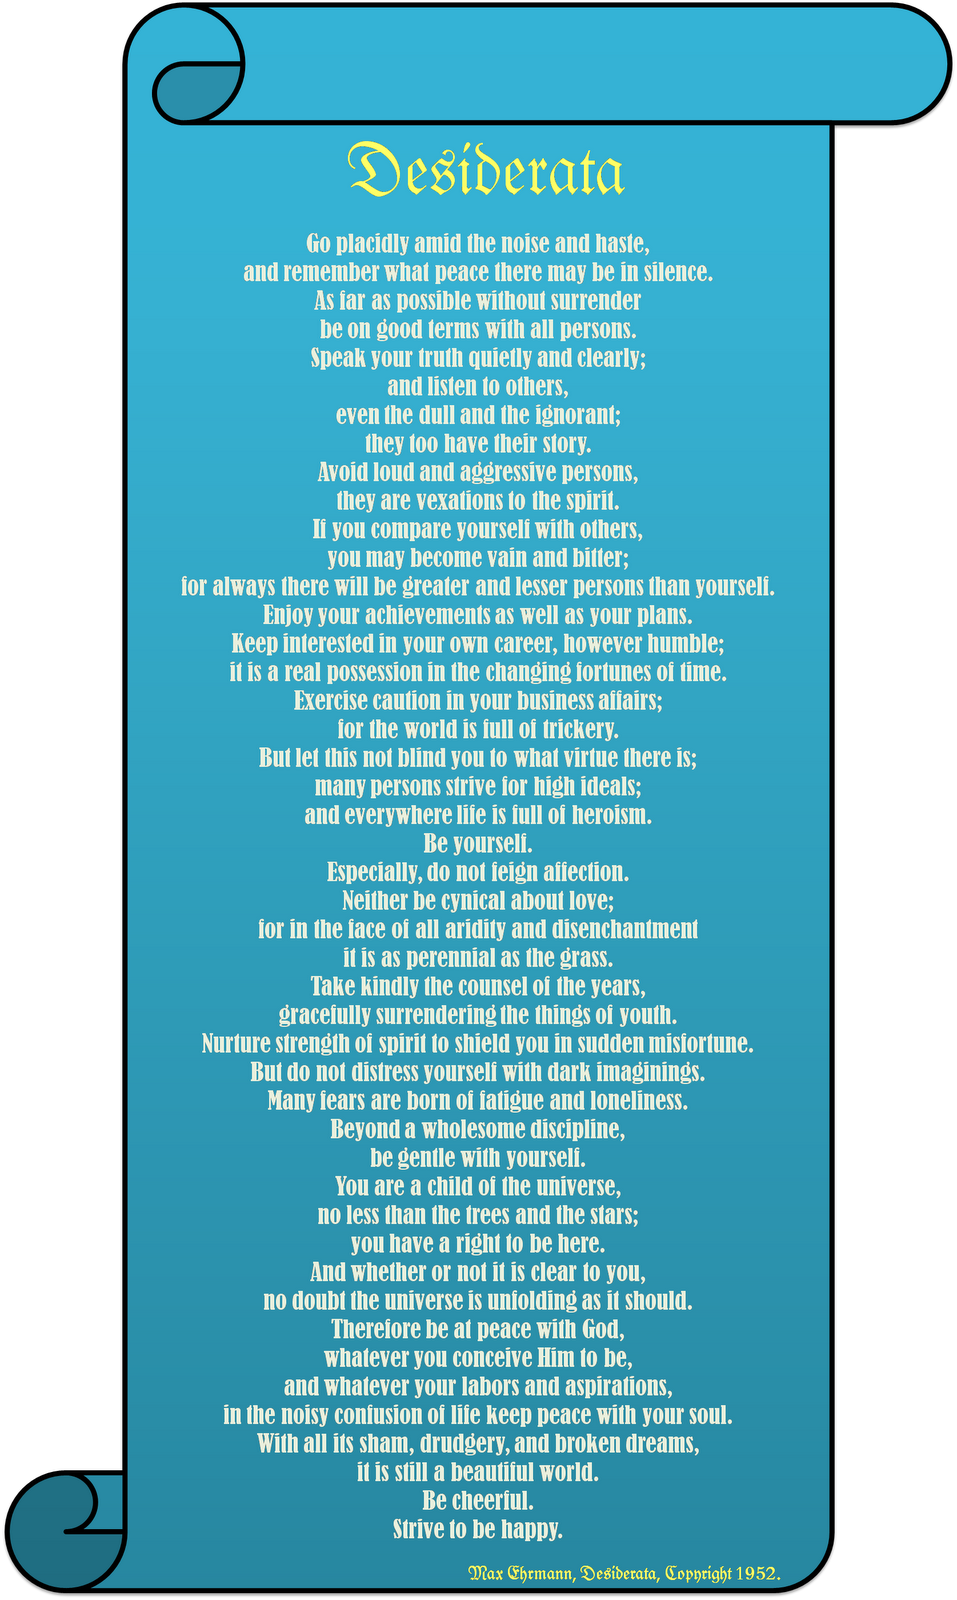 desiderata-poem-by-max-ehrmann-classic-tropical-sunset-design-painting